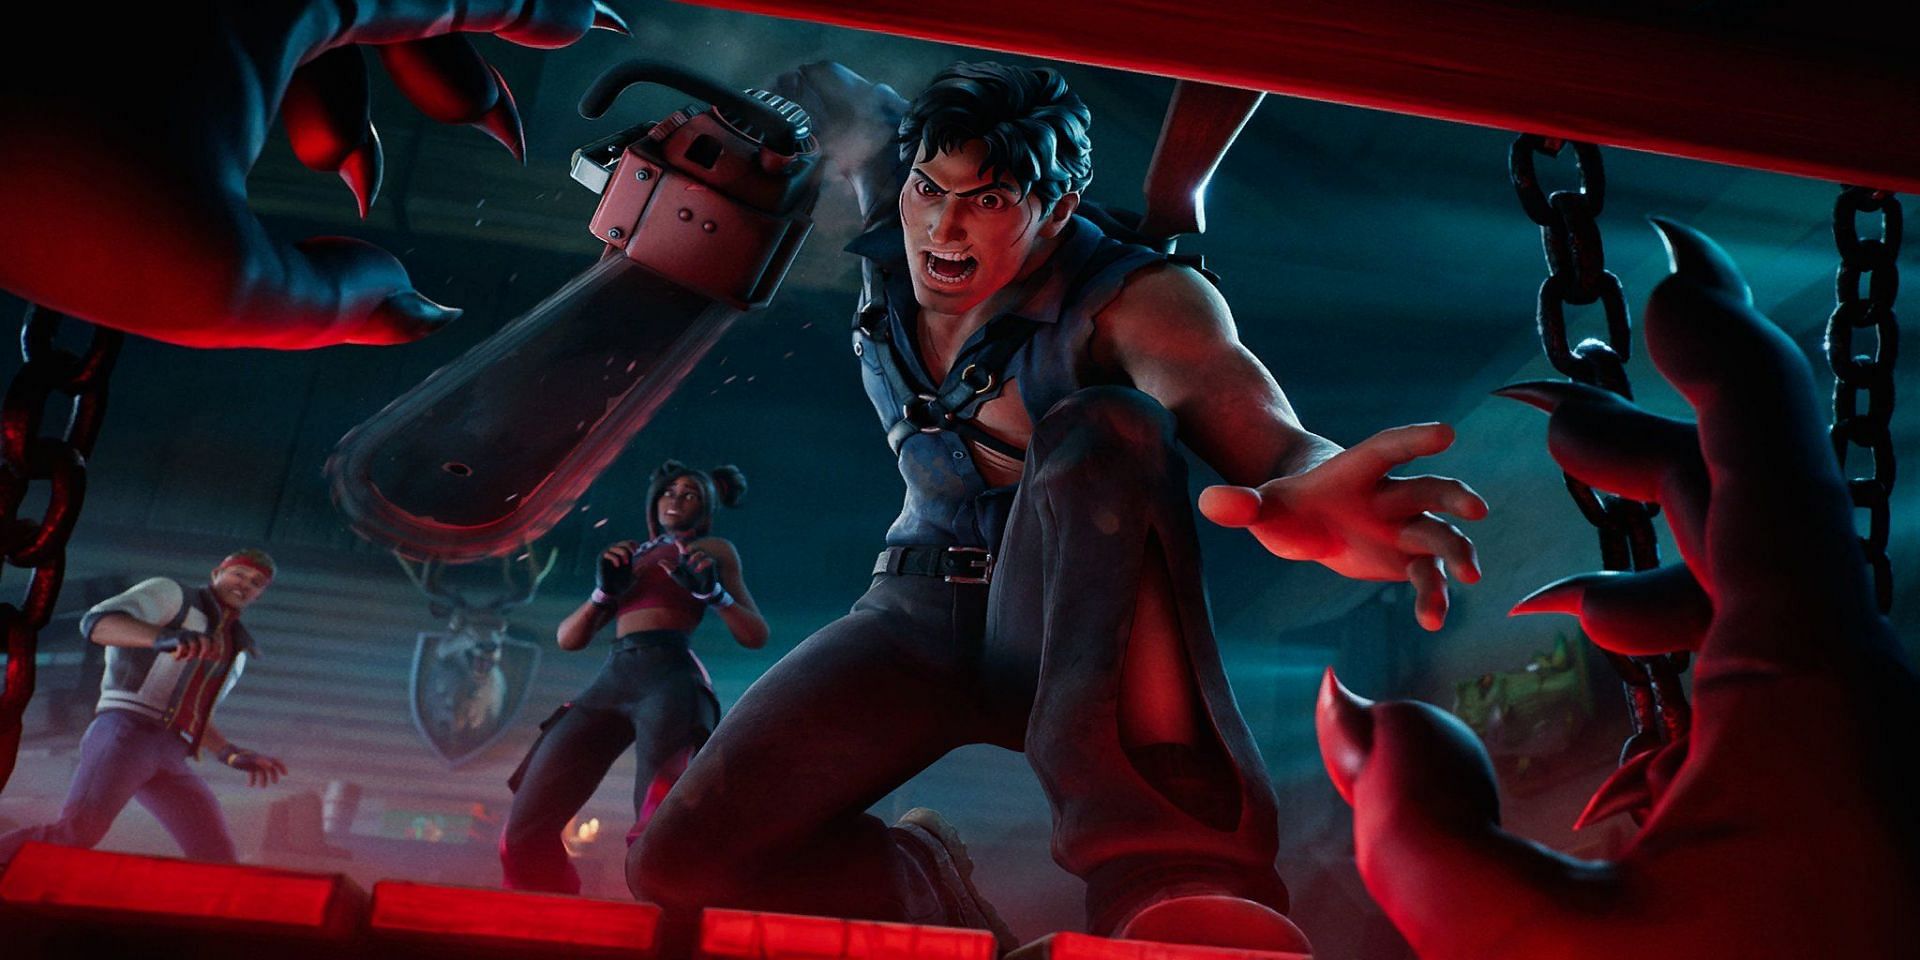 Fortnite x Evil Dead collaboration is also coming to the game (Image via Epic Games)